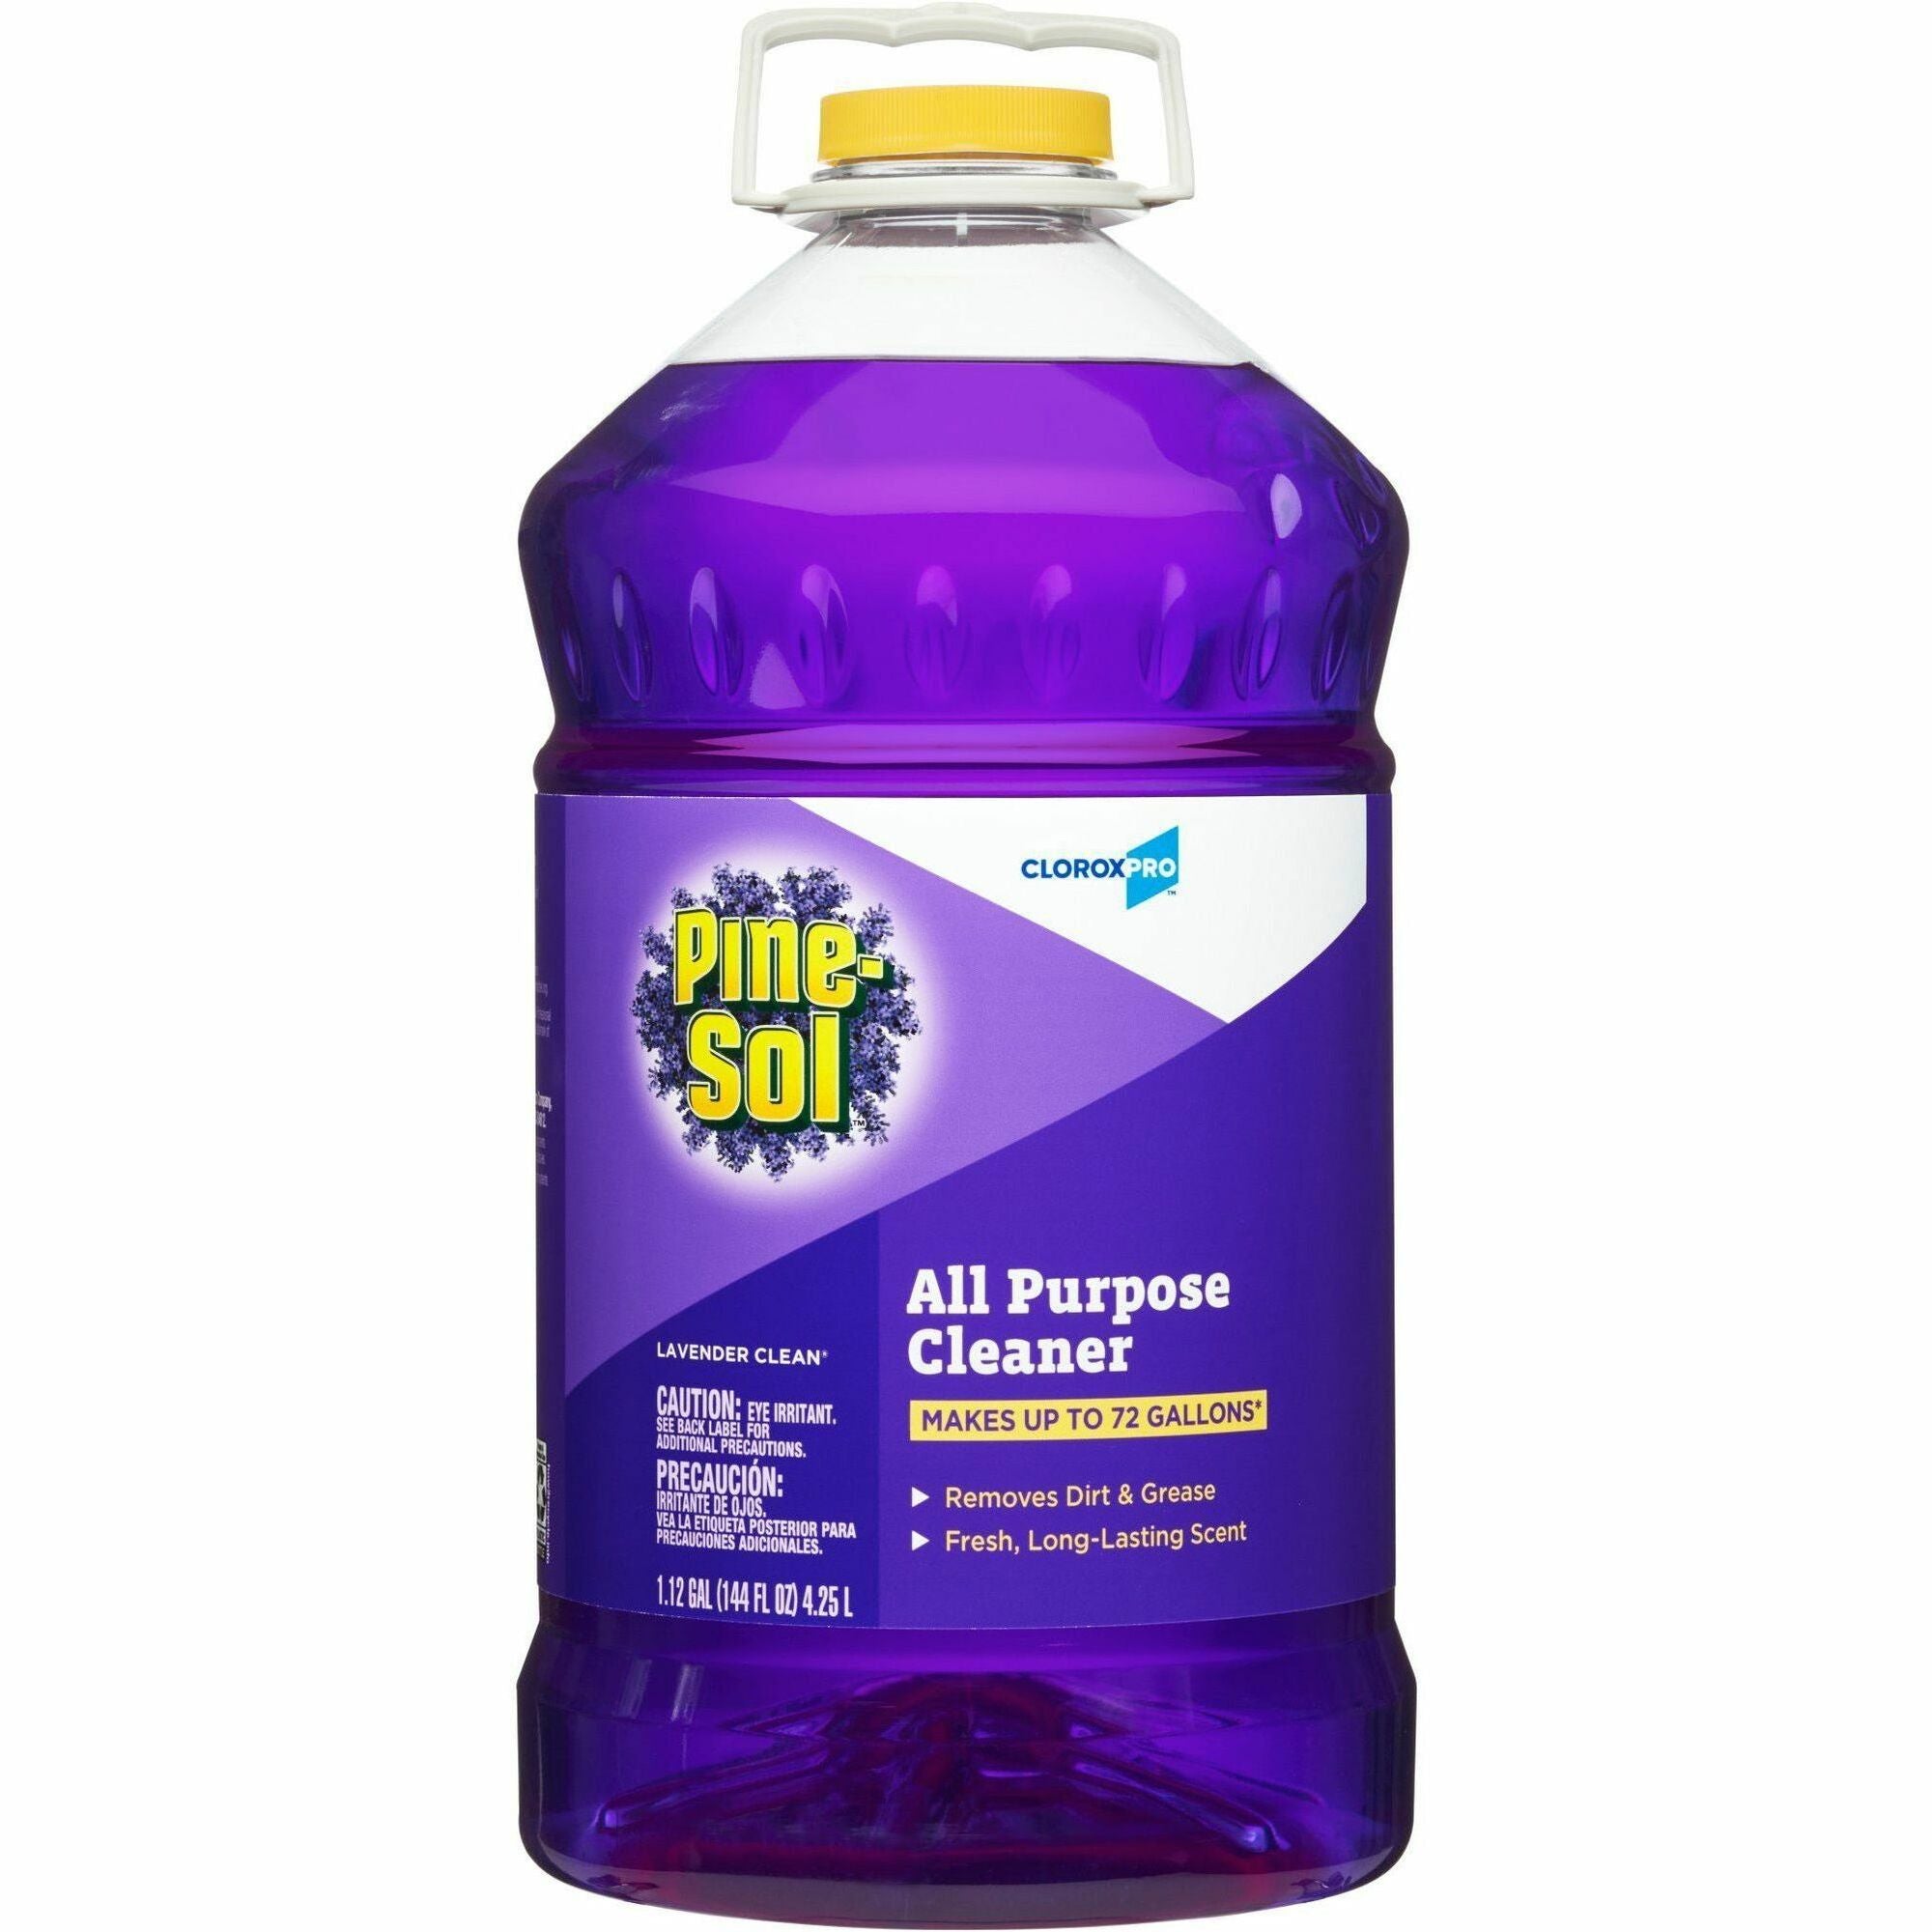 CloroxPro Pine-Sol All Purpose Cleaner - Concentrate - 144 fl oz (4.5 quart) - Lavender Clean Scent - 126 / Pallet - Water Soluble, Deodorize, Antibacterial - Purple - 1